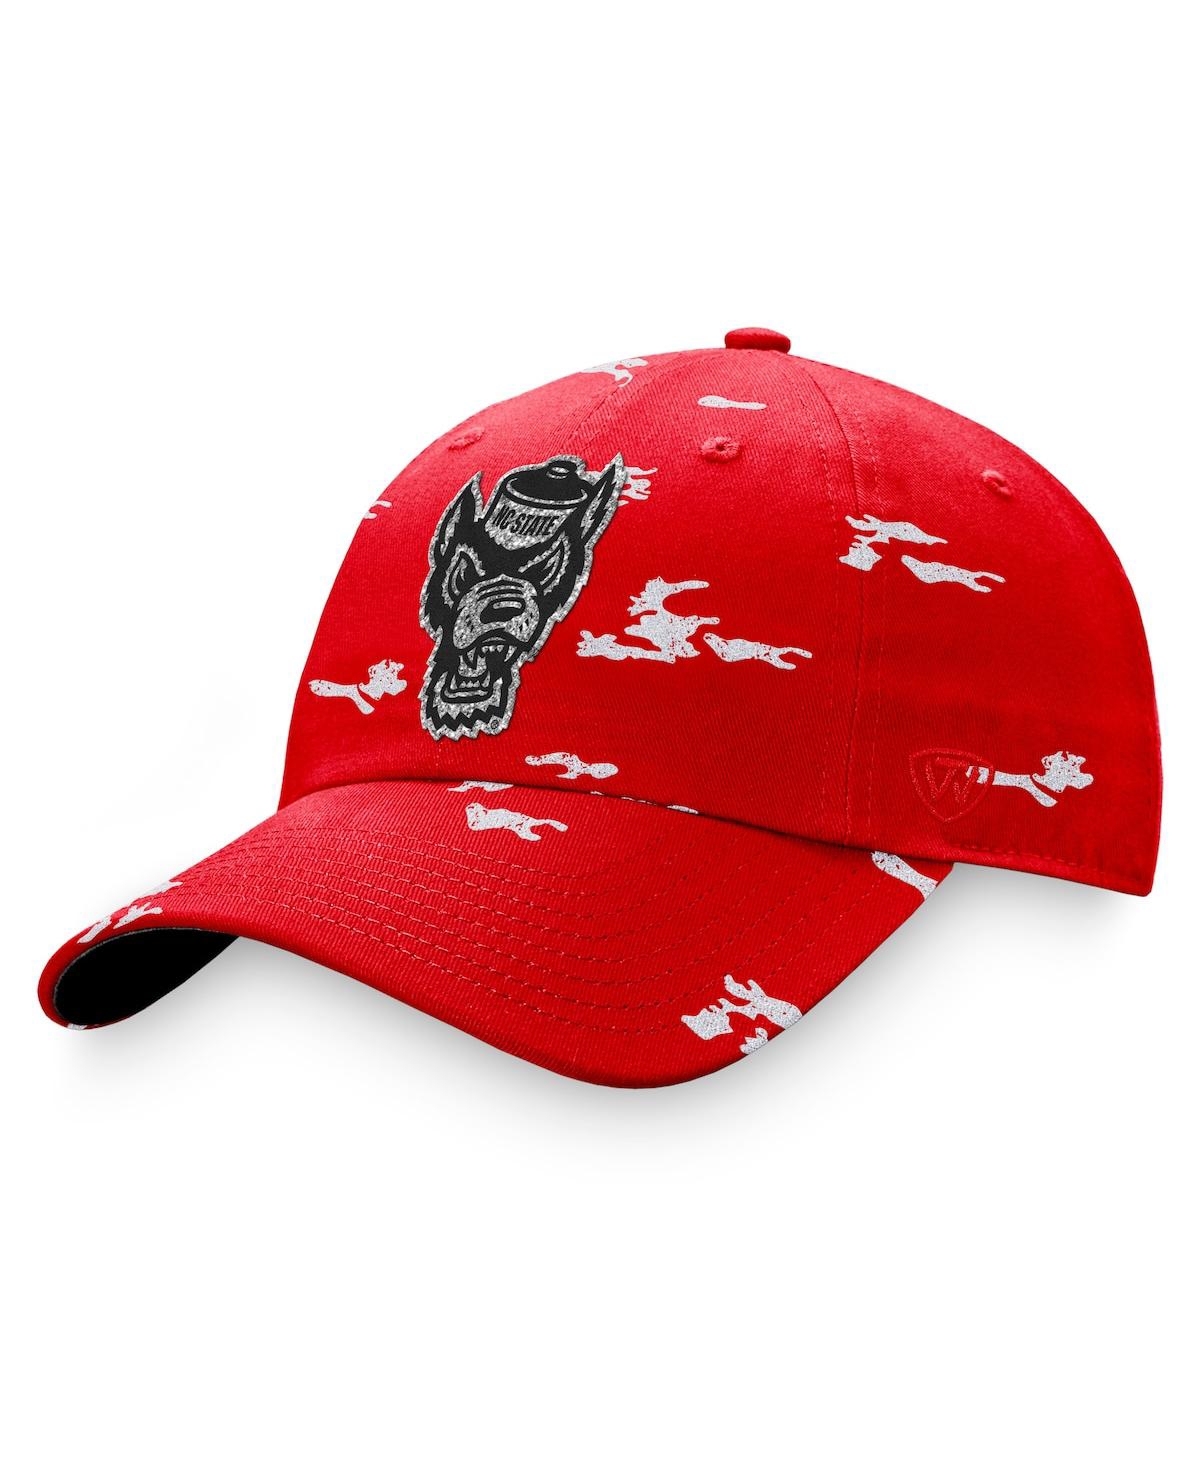 Women's Top of the World Red Nc State Wolfpack Oht Military-Inspired Appreciation Betty Adjustable Hat - Red